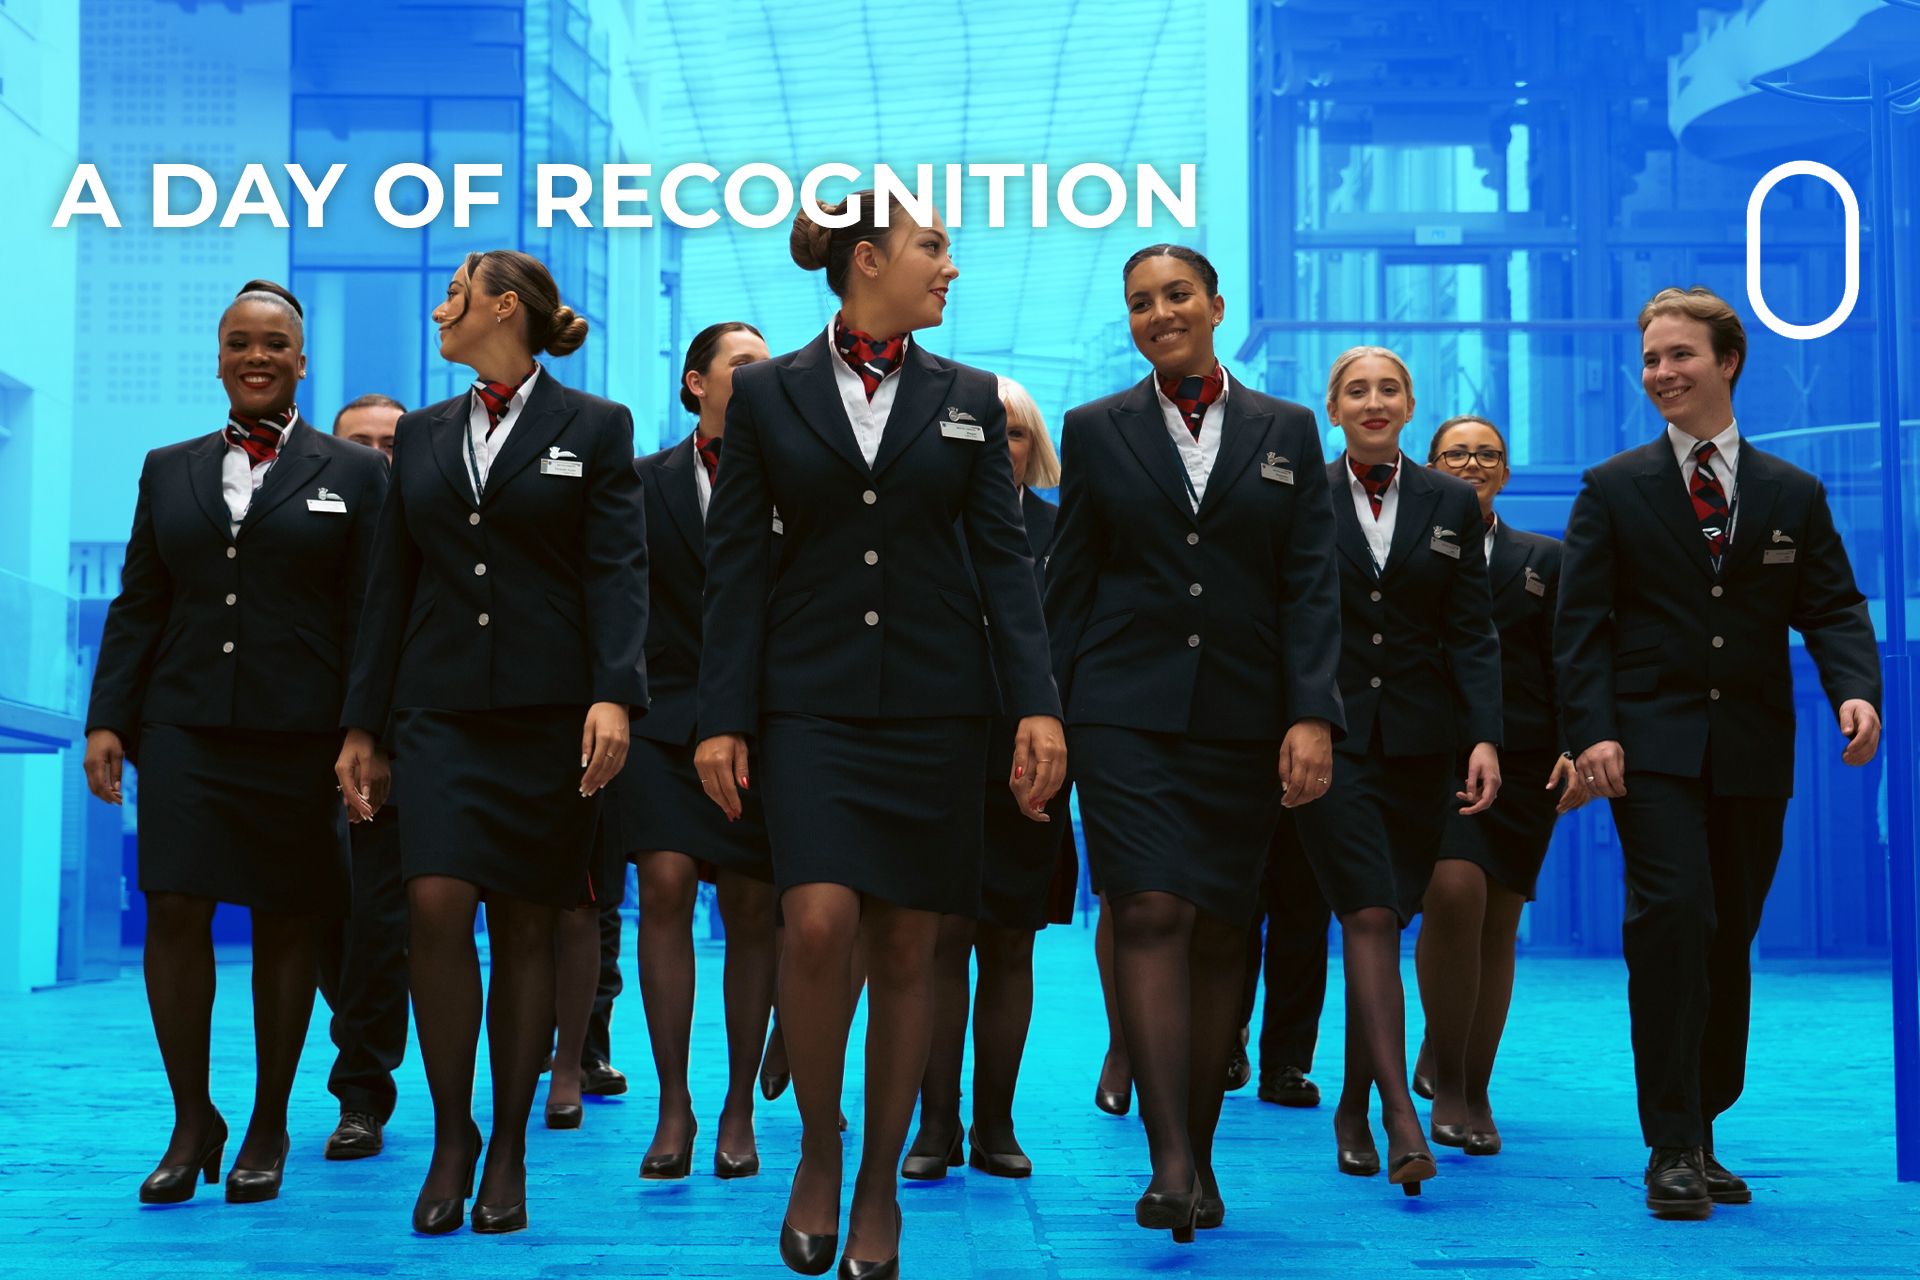 International Flight Attendant Day What Is It & Why Does It Matter?